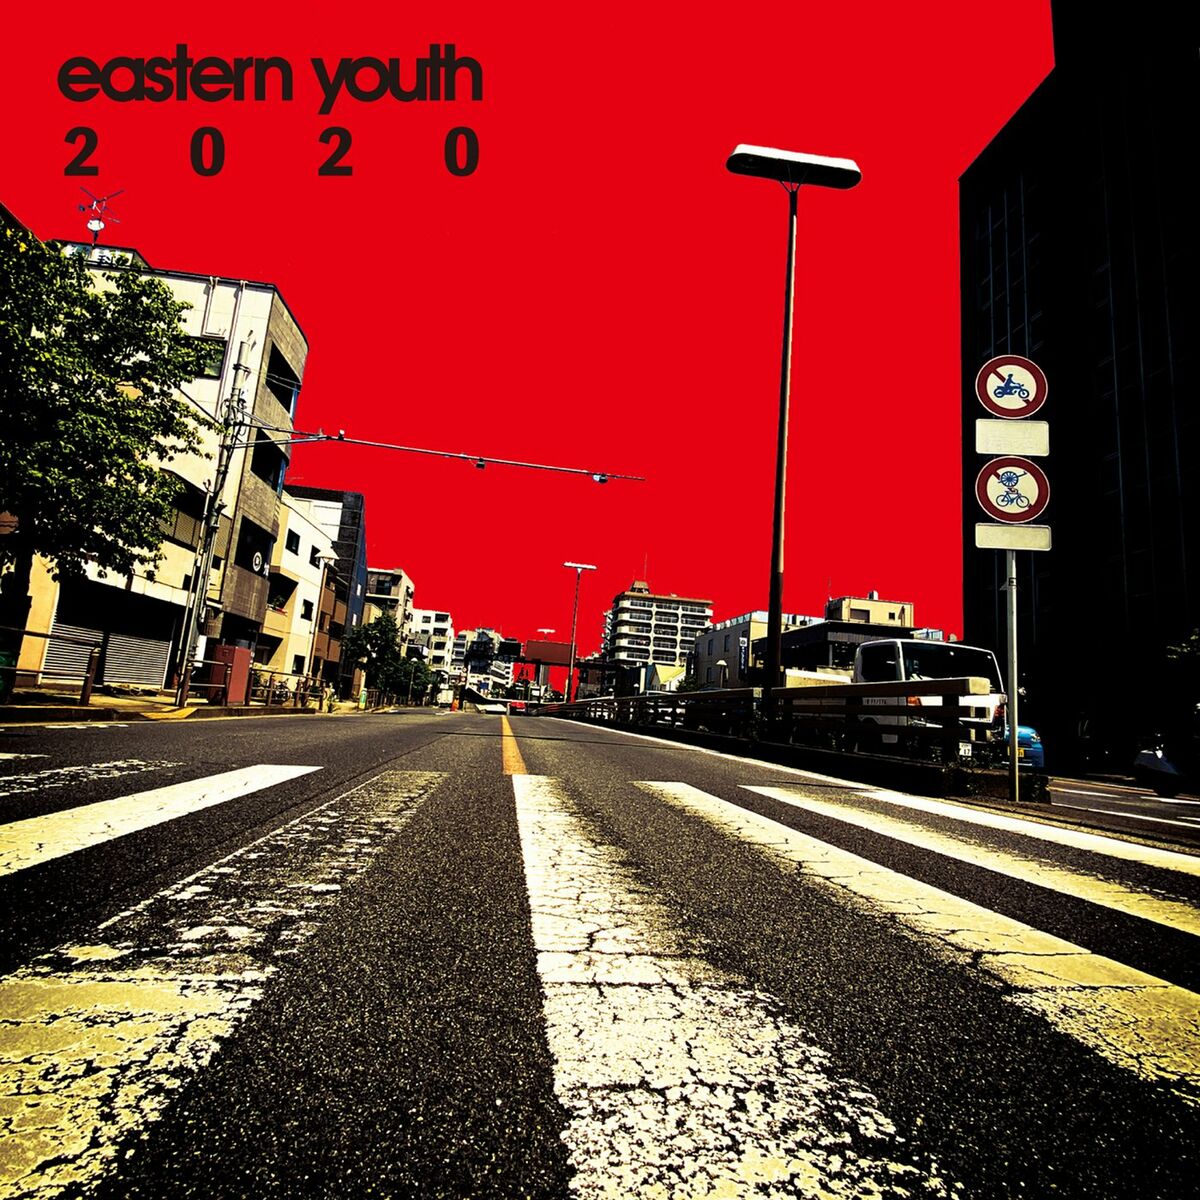 Eastern Youth: albums, songs, playlists | Listen on Deezer